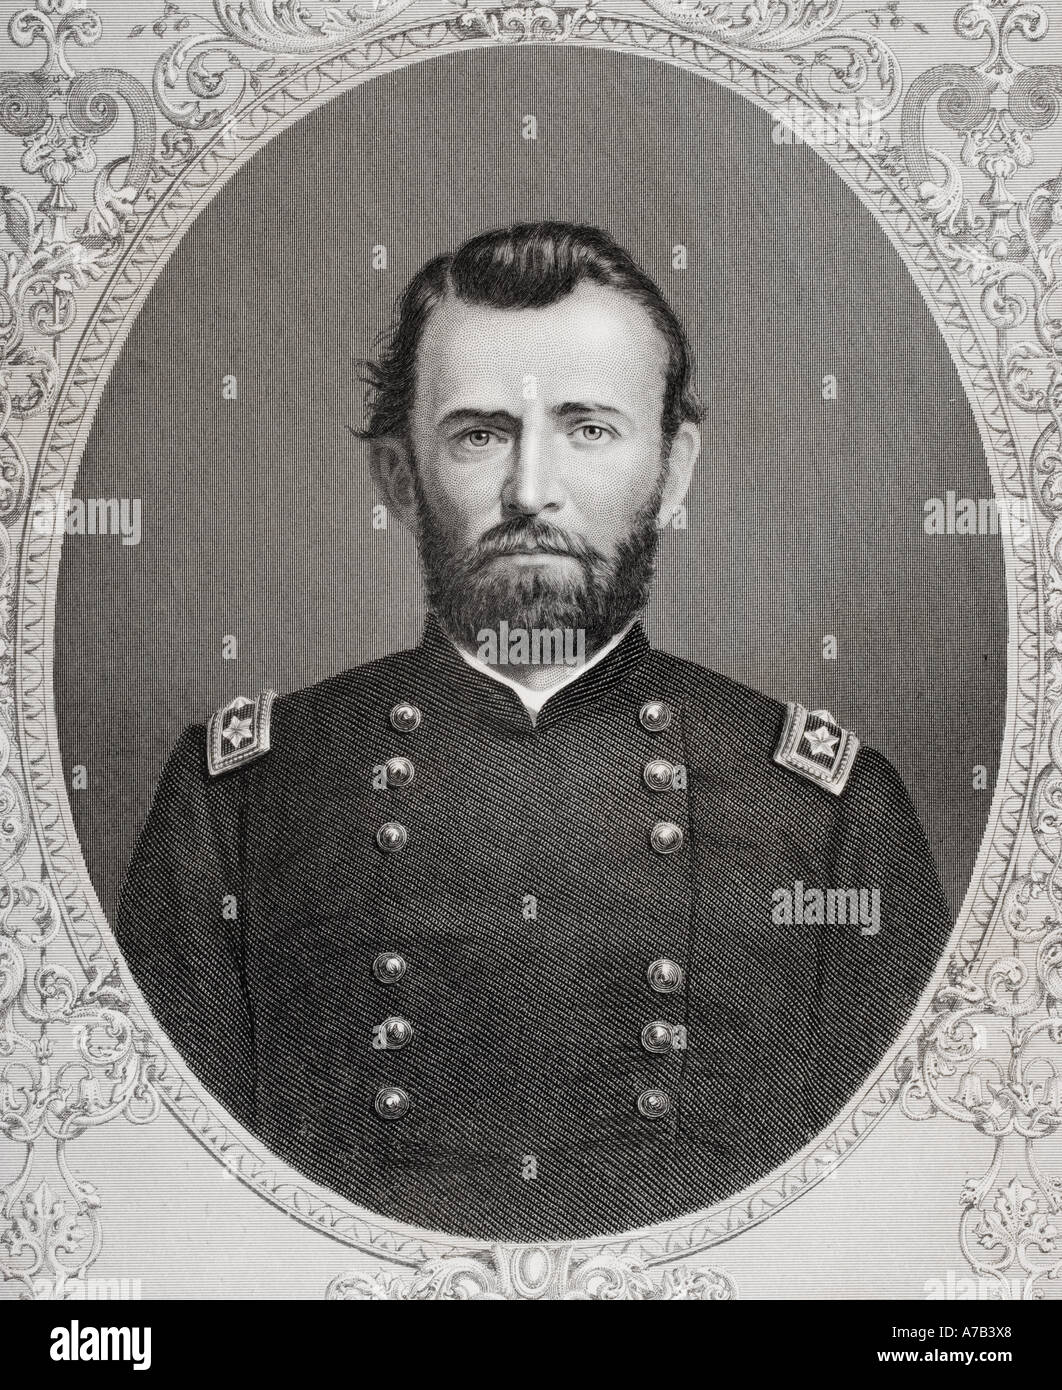 Ulysses S. Grant, 1822 - 1885.  Commmander of Union armies in the  American Civil War and 18th President of the  United States of America. Stock Photo